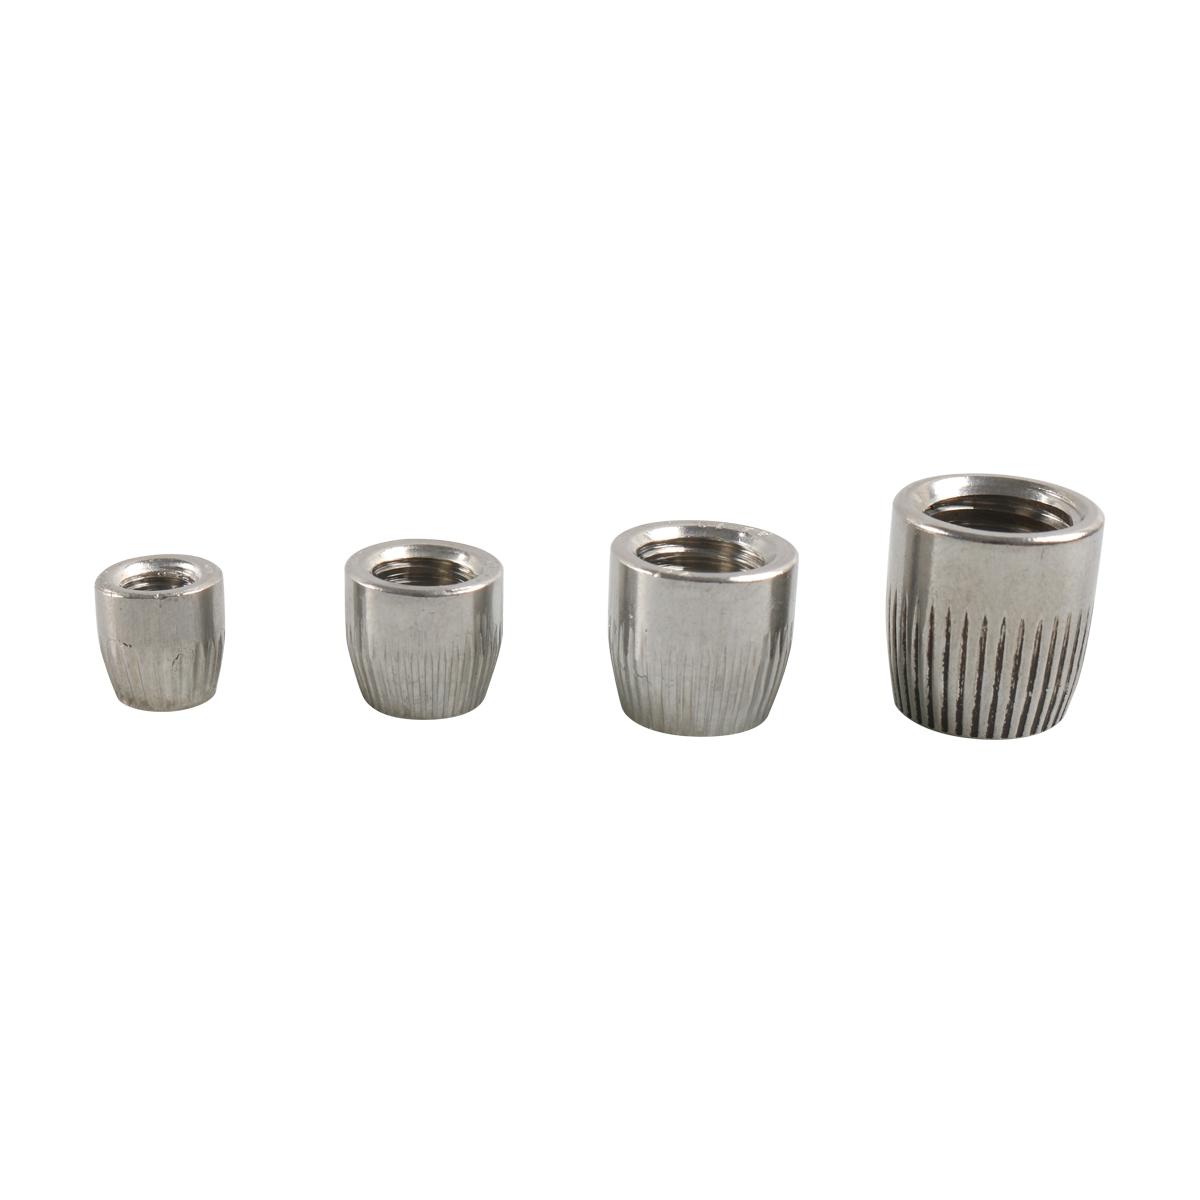 100pcs / Set Stainless Steel Knurled Cone Nut(Silver)